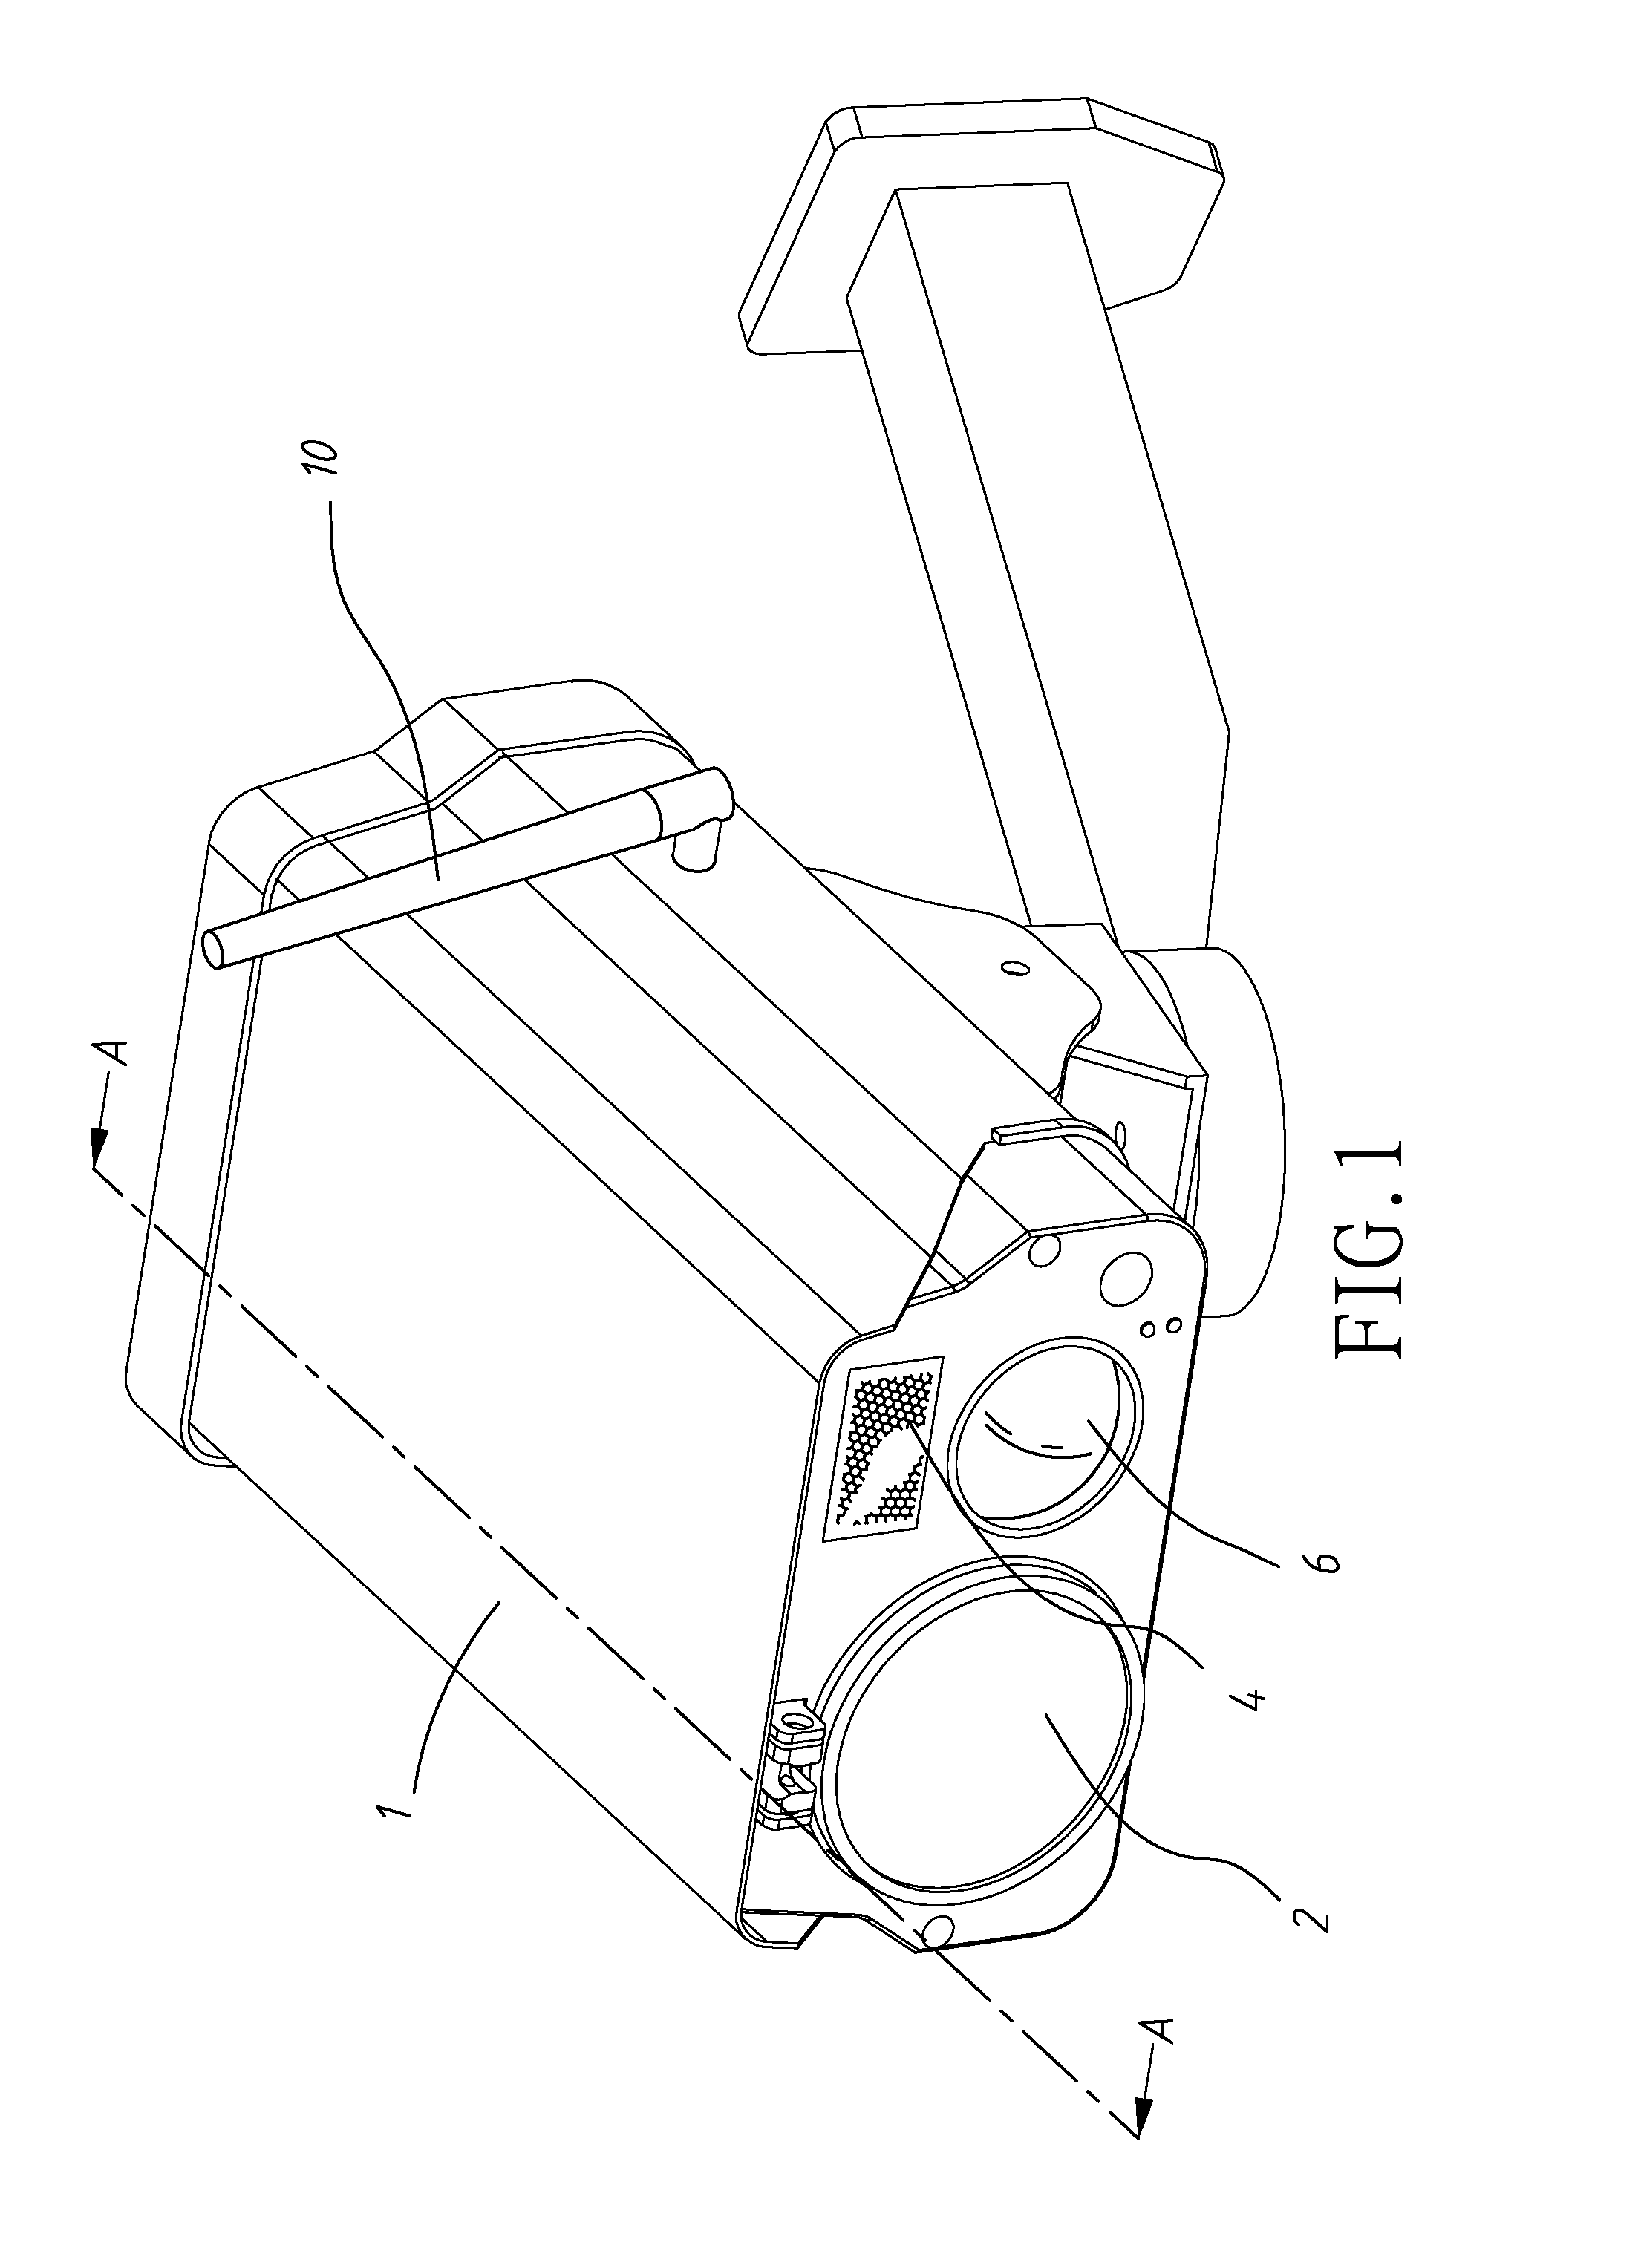 Concealed net throwing device